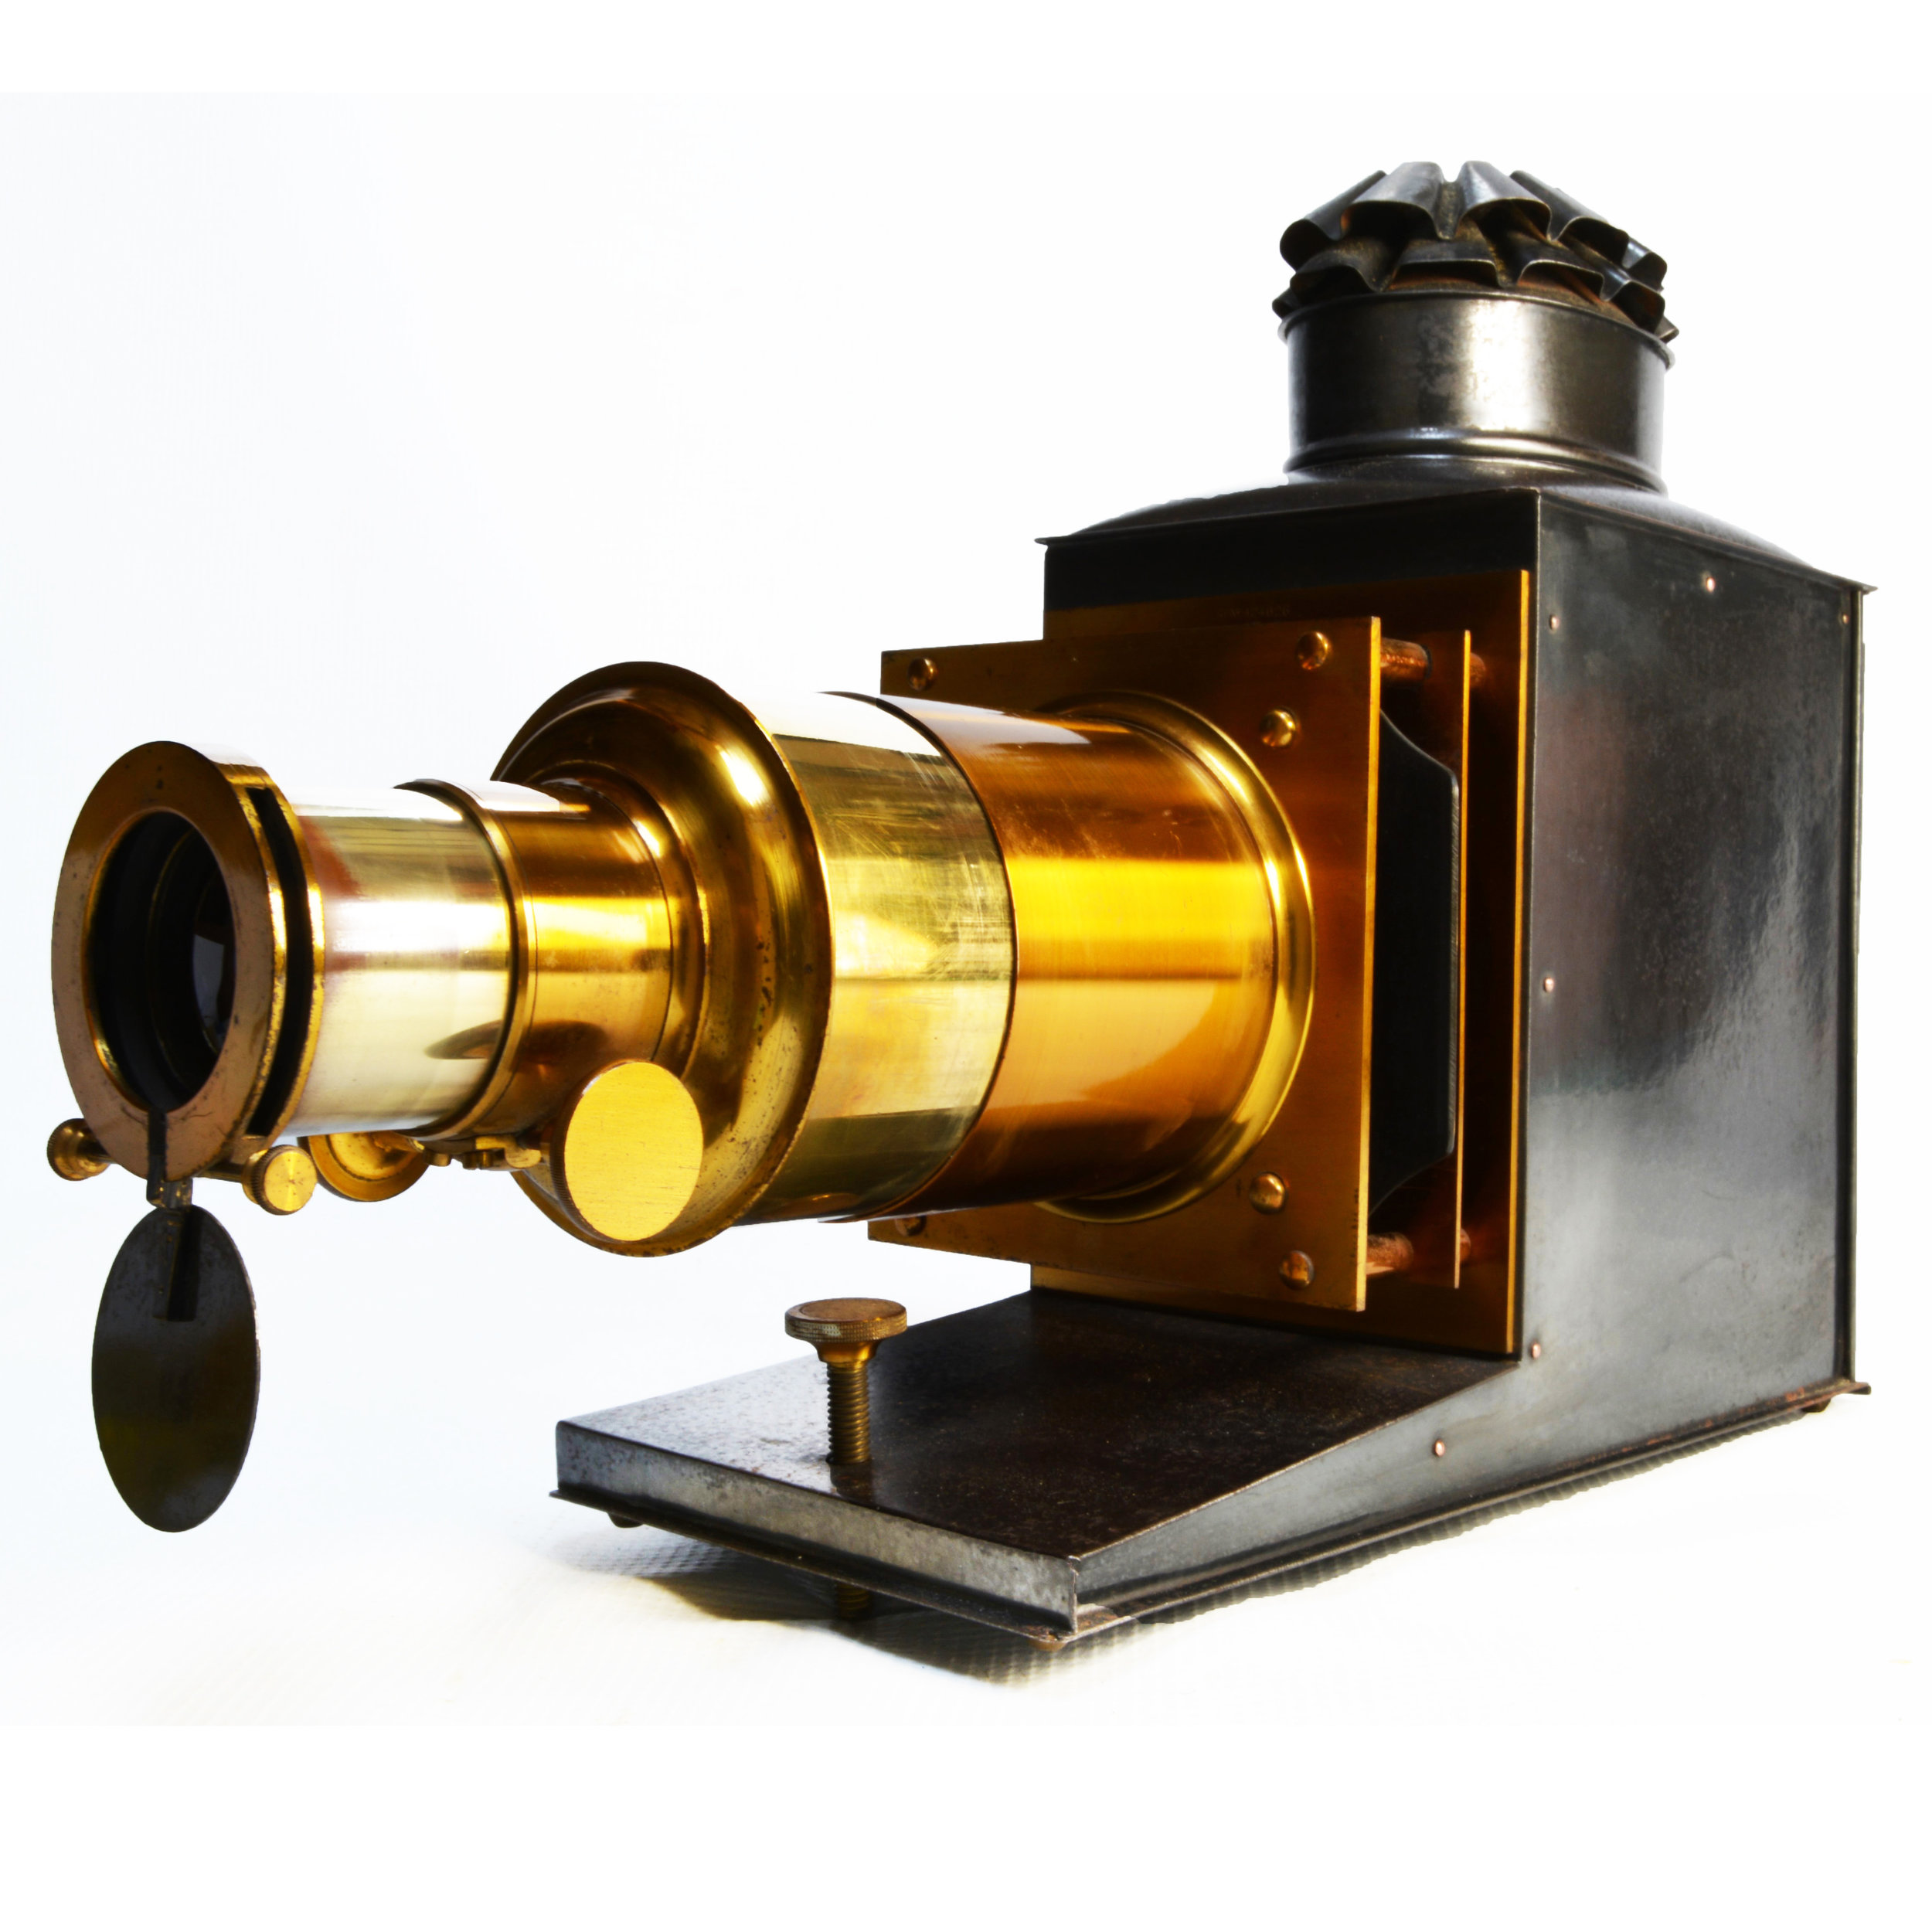 Antique magic lantern by John Wrench and Sons